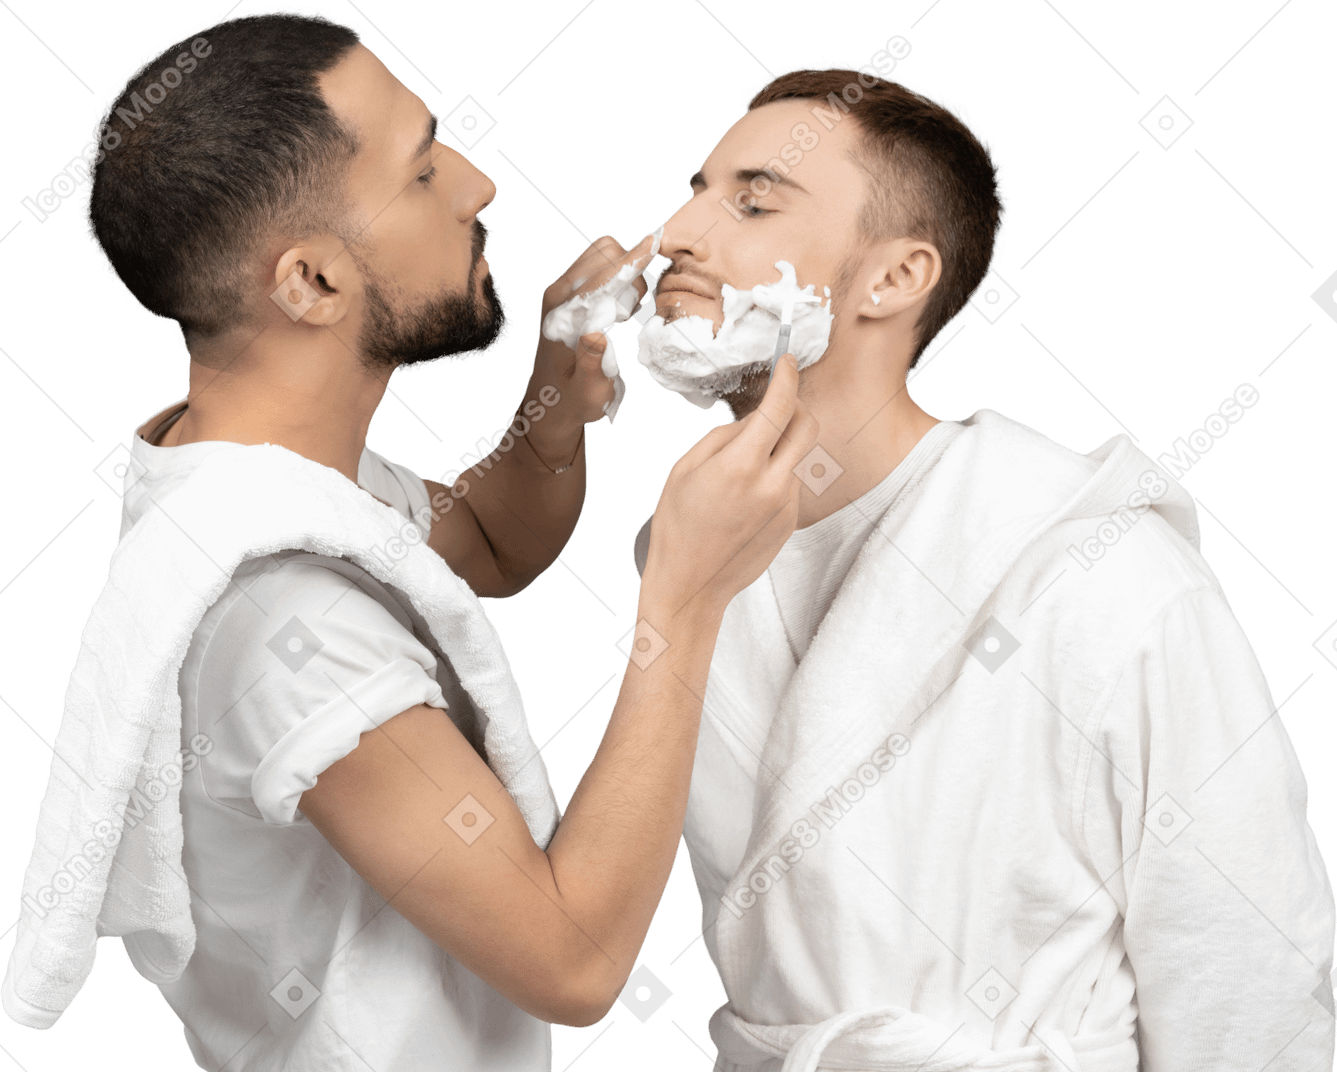 Young caucasian man carefully shaving his partner and putting shaving foam on his nose